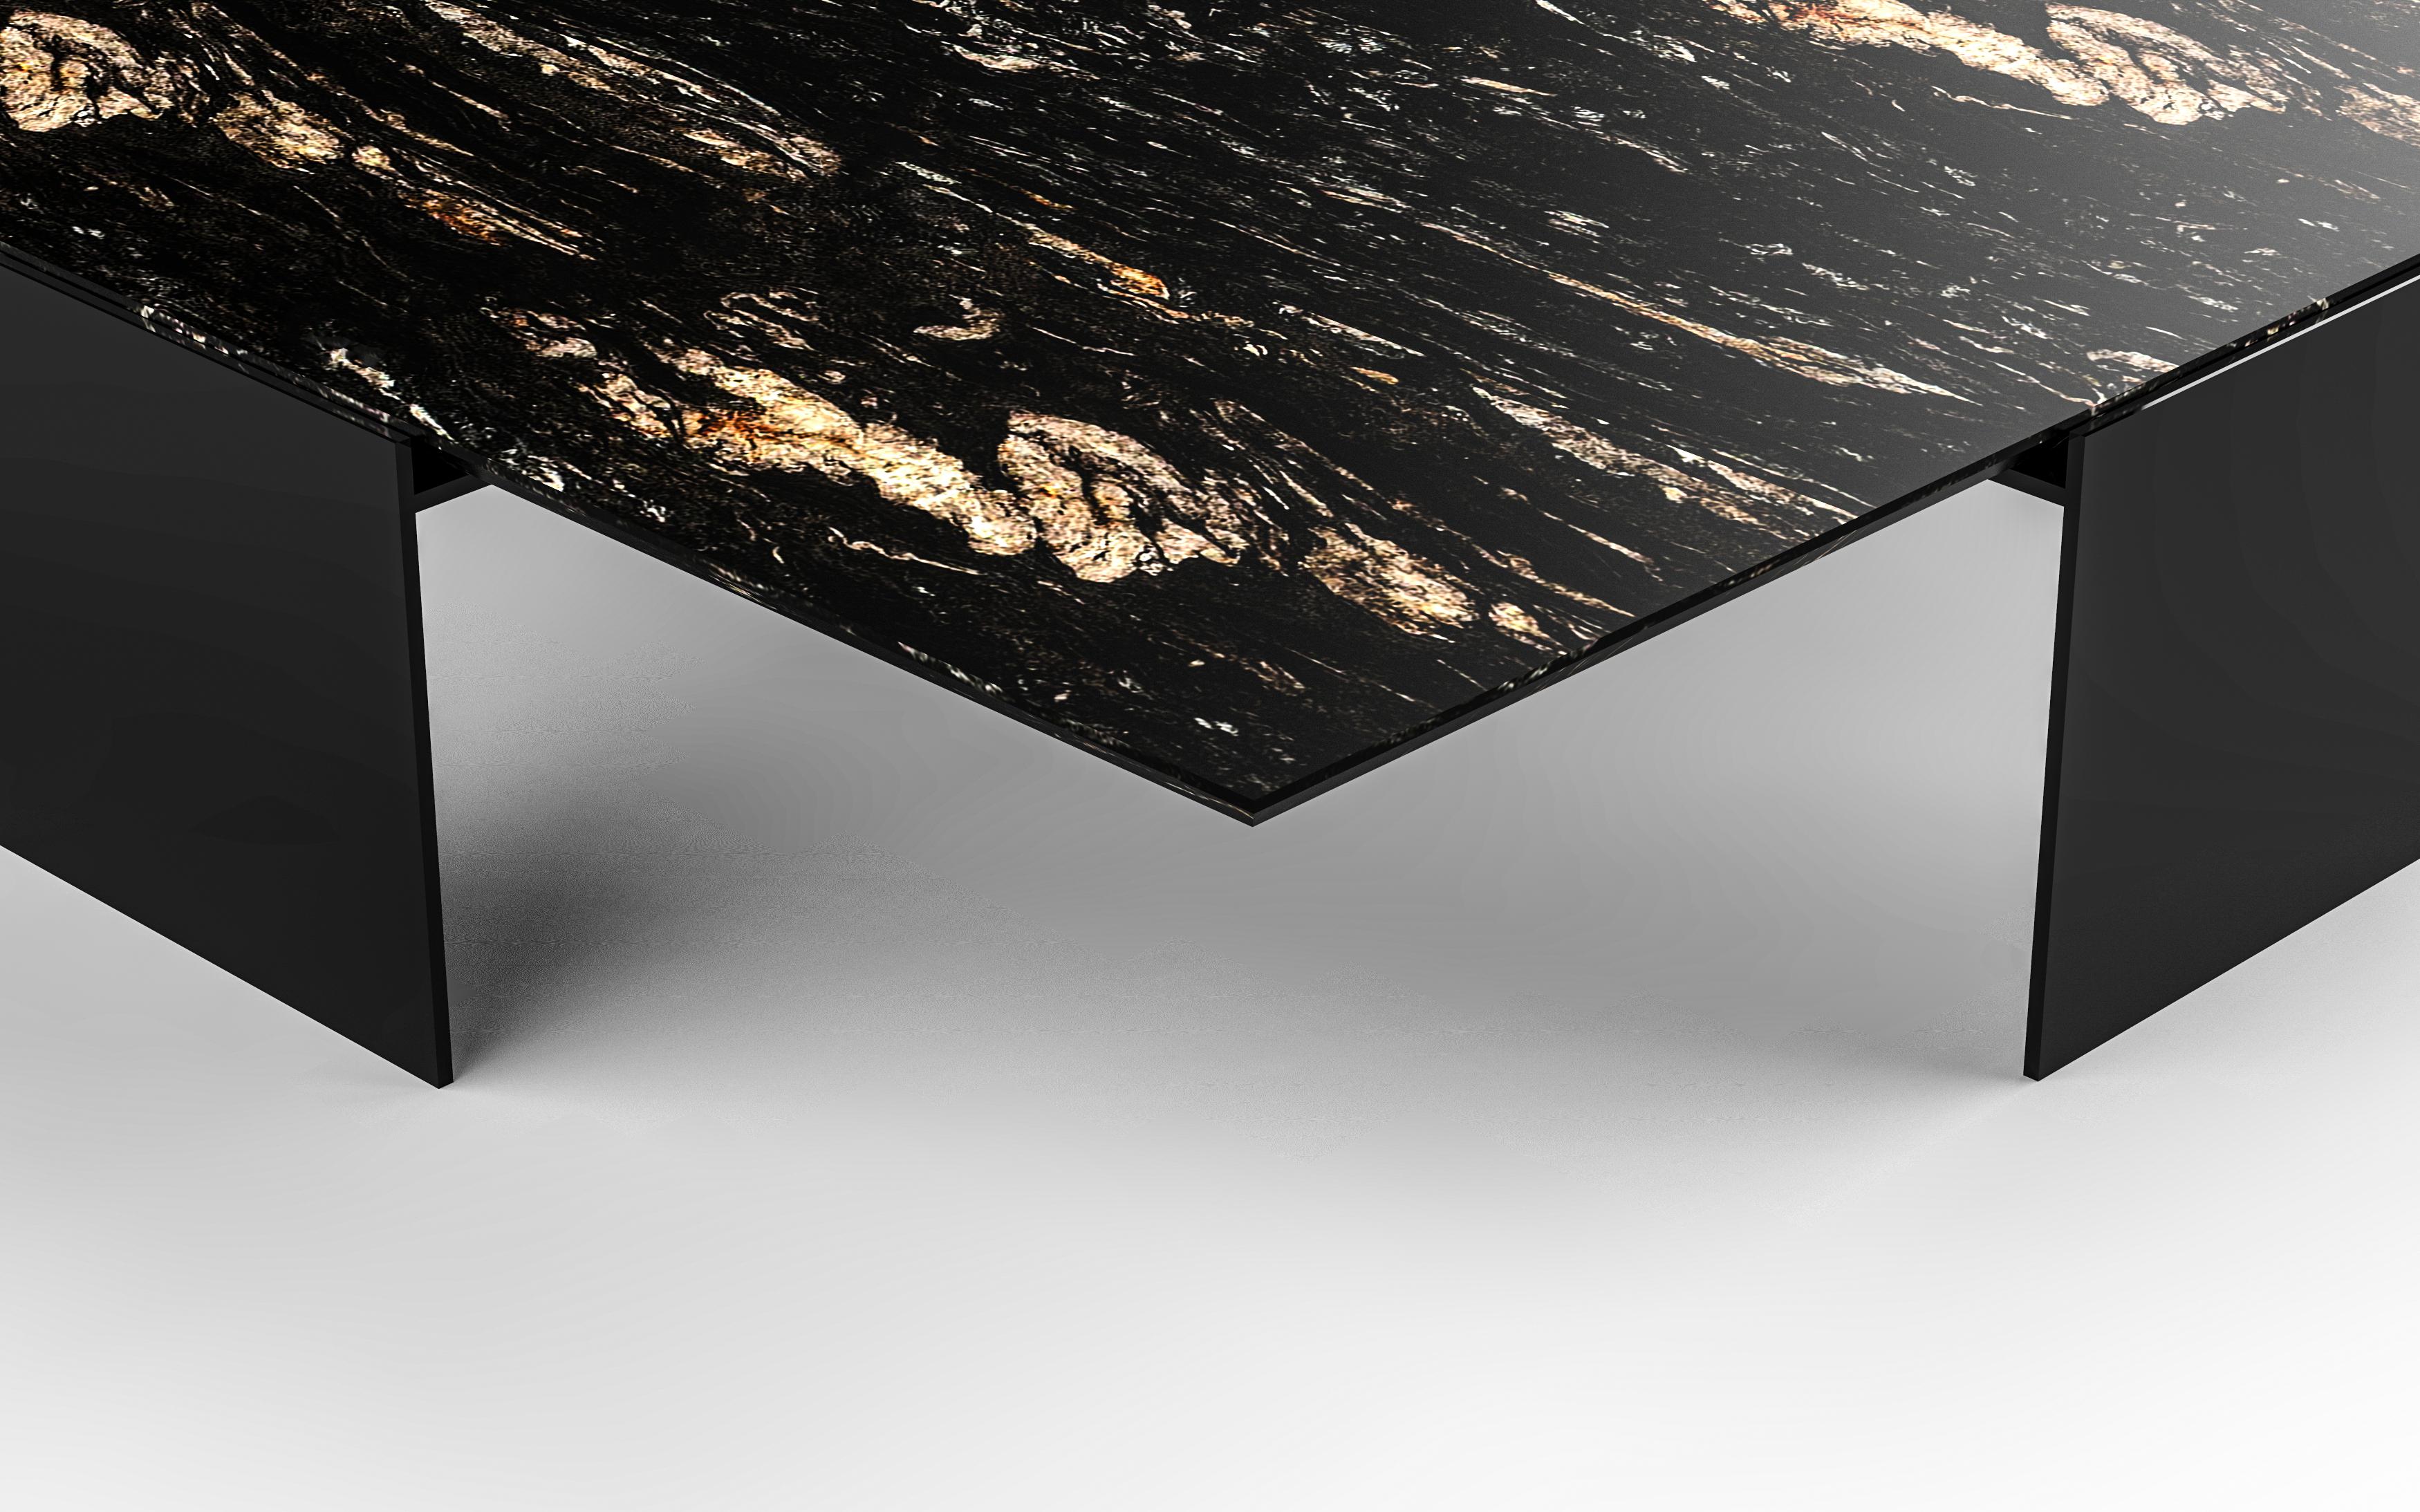 Handcrafted stone and metal elements highlight the pure form of the Fin Cocktail Table by Chai Ming Studios.
Resting atop the architectural steel frame, the cantilevered stone top features a precision bevel edge detail.
Attention to detail design